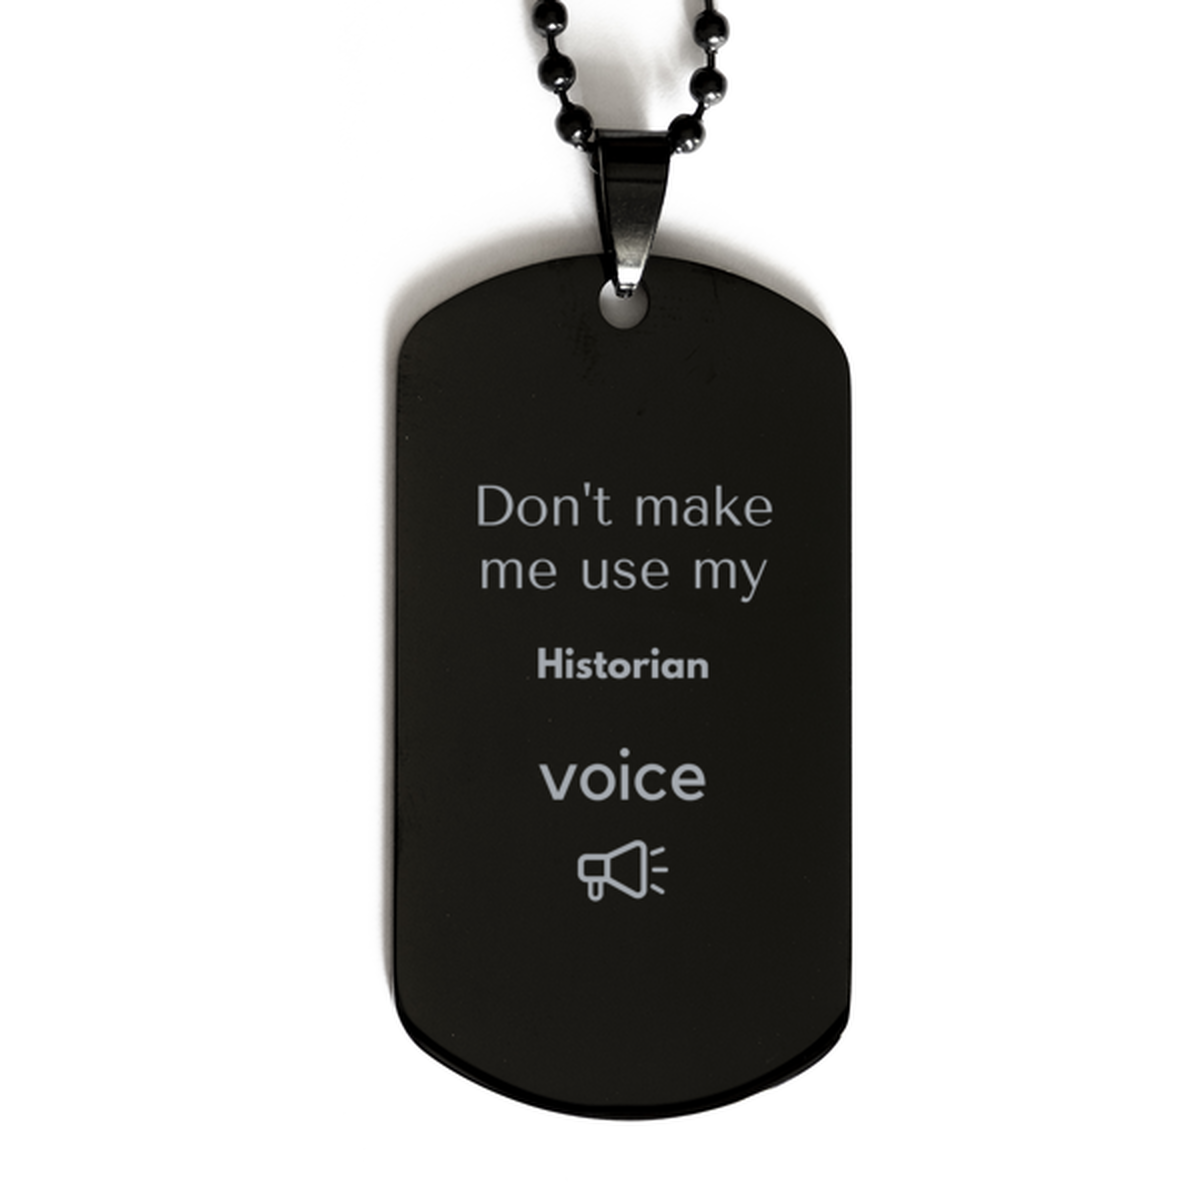 Don't make me use my Historian voice, Sarcasm Historian Gifts, Christmas Historian Black Dog Tag Birthday Unique Gifts For Historian Coworkers, Men, Women, Colleague, Friends